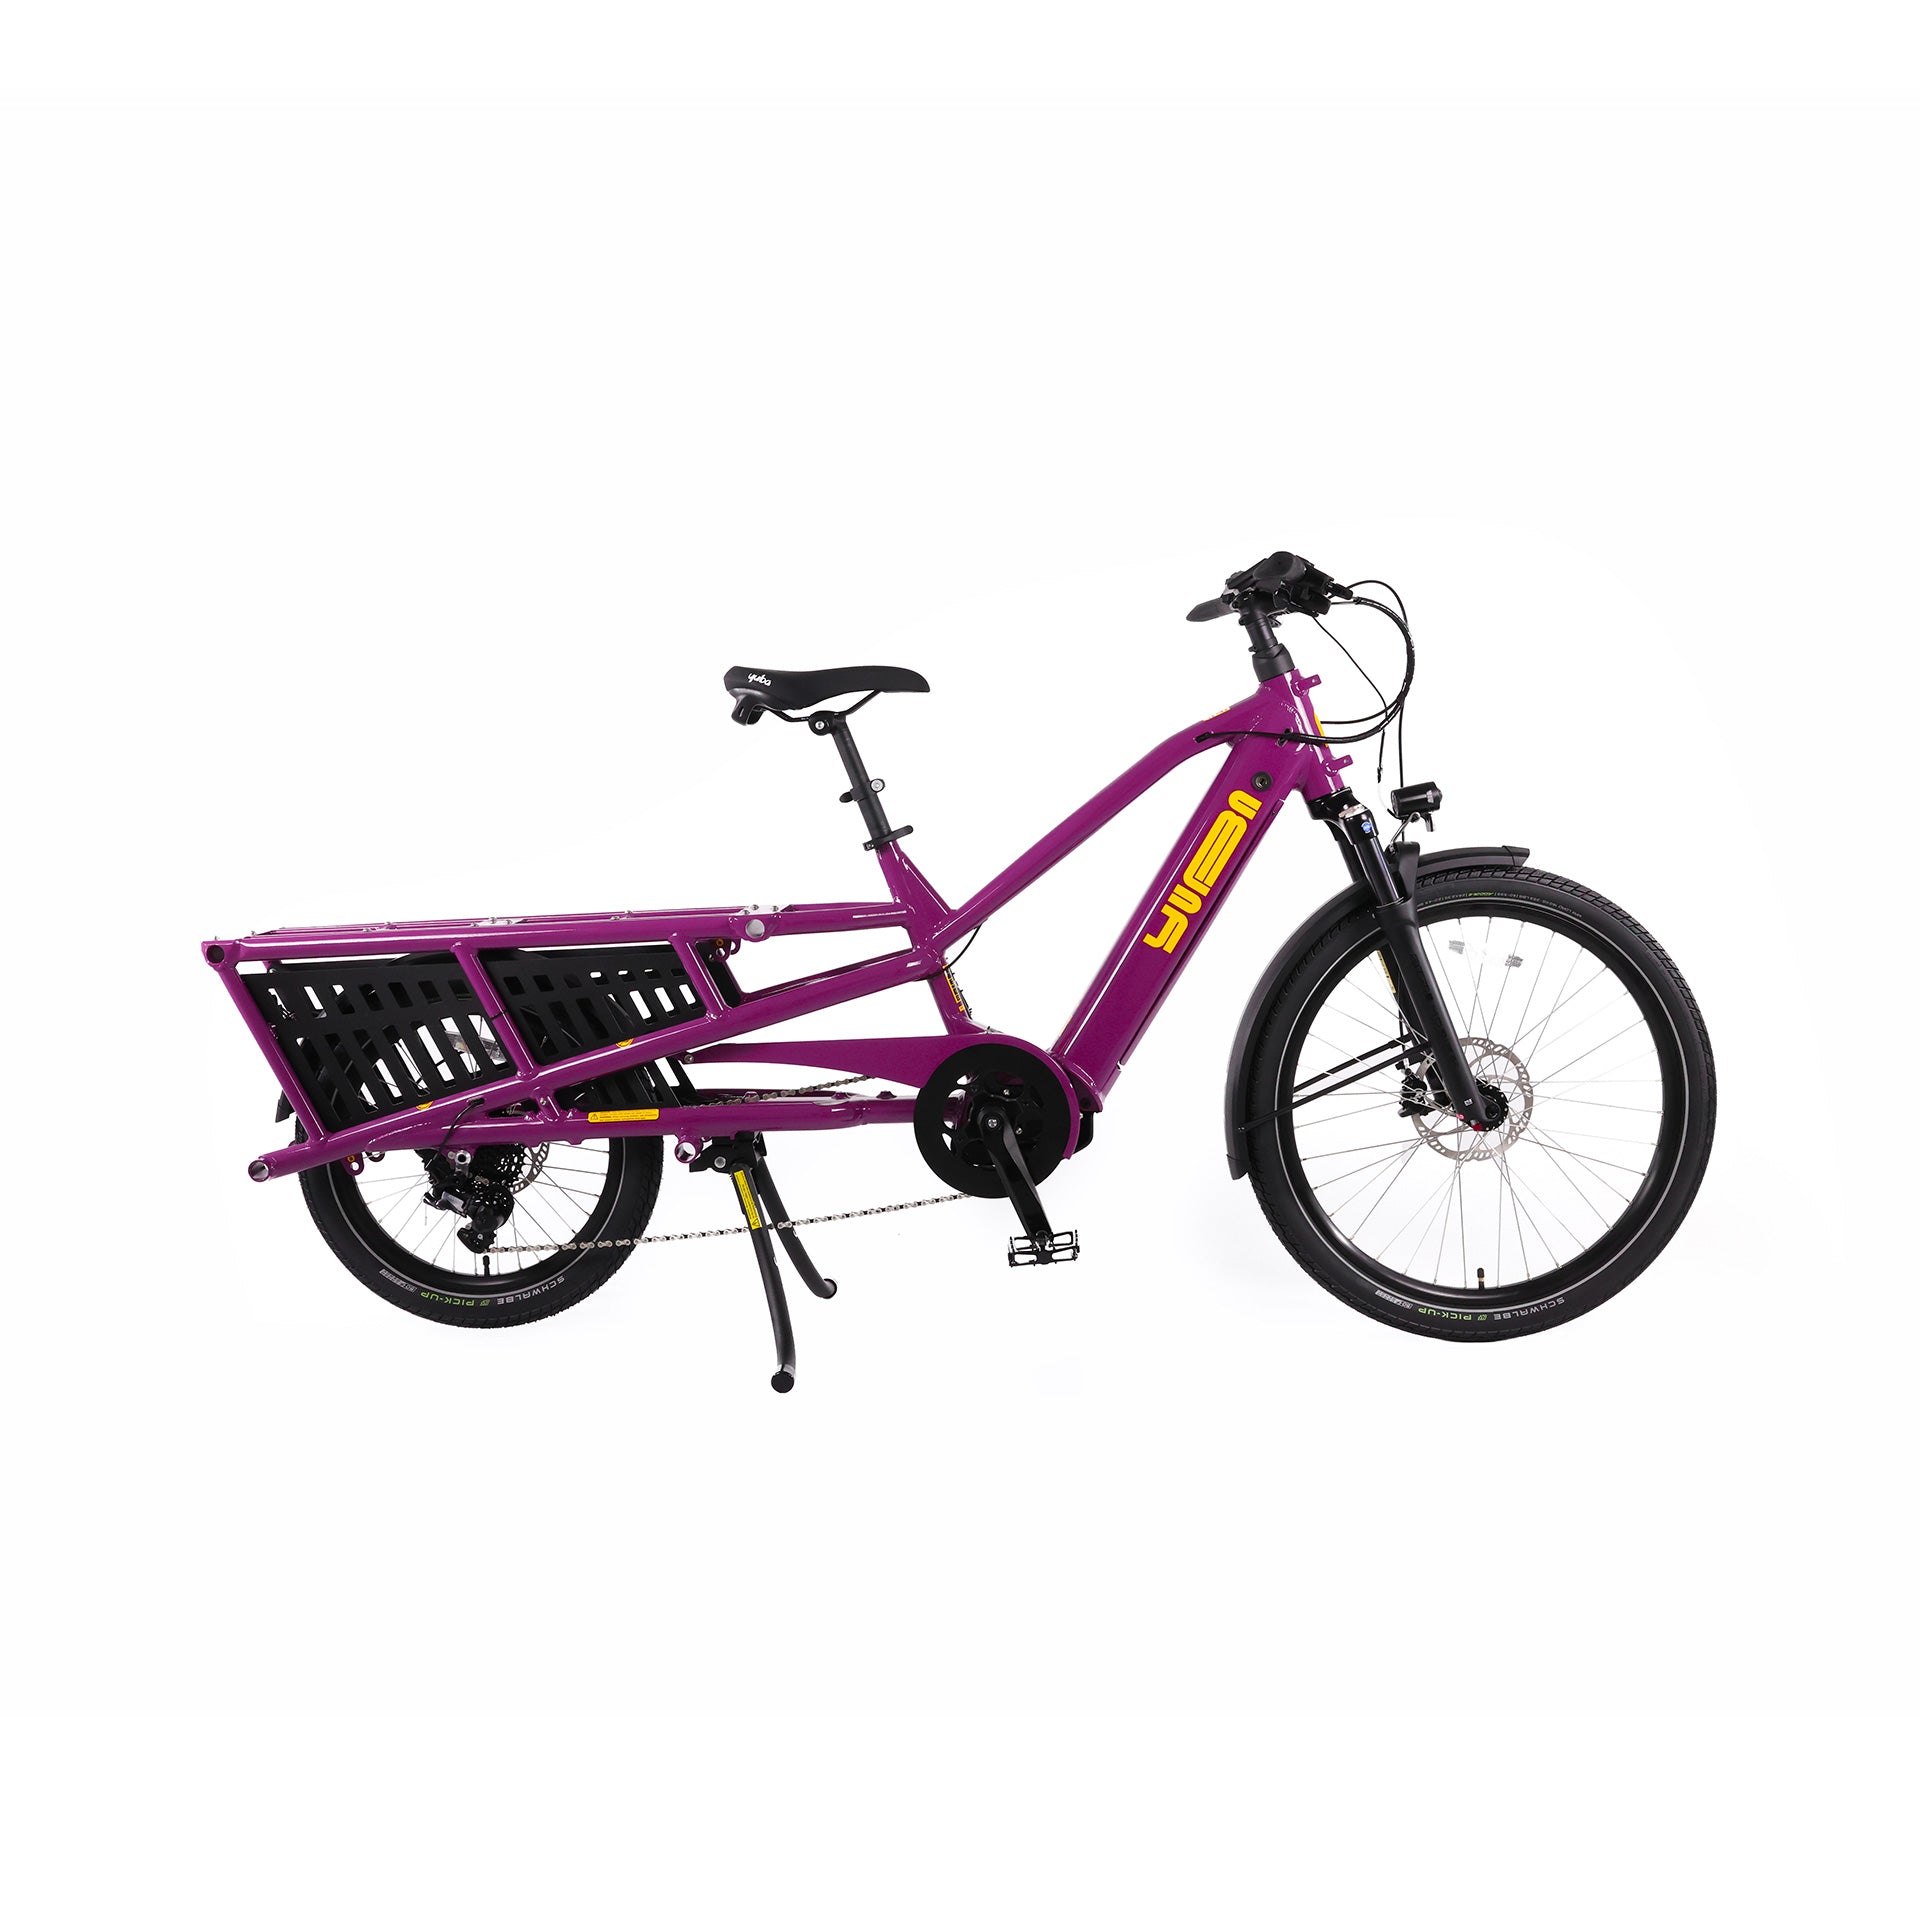 A product image of the Yuba Spicy Curry V4 electric longtail cargo bike. The frame colour is Very Berry (a red grape colour) and the bike is in its basic set up, with no accessories attached. 